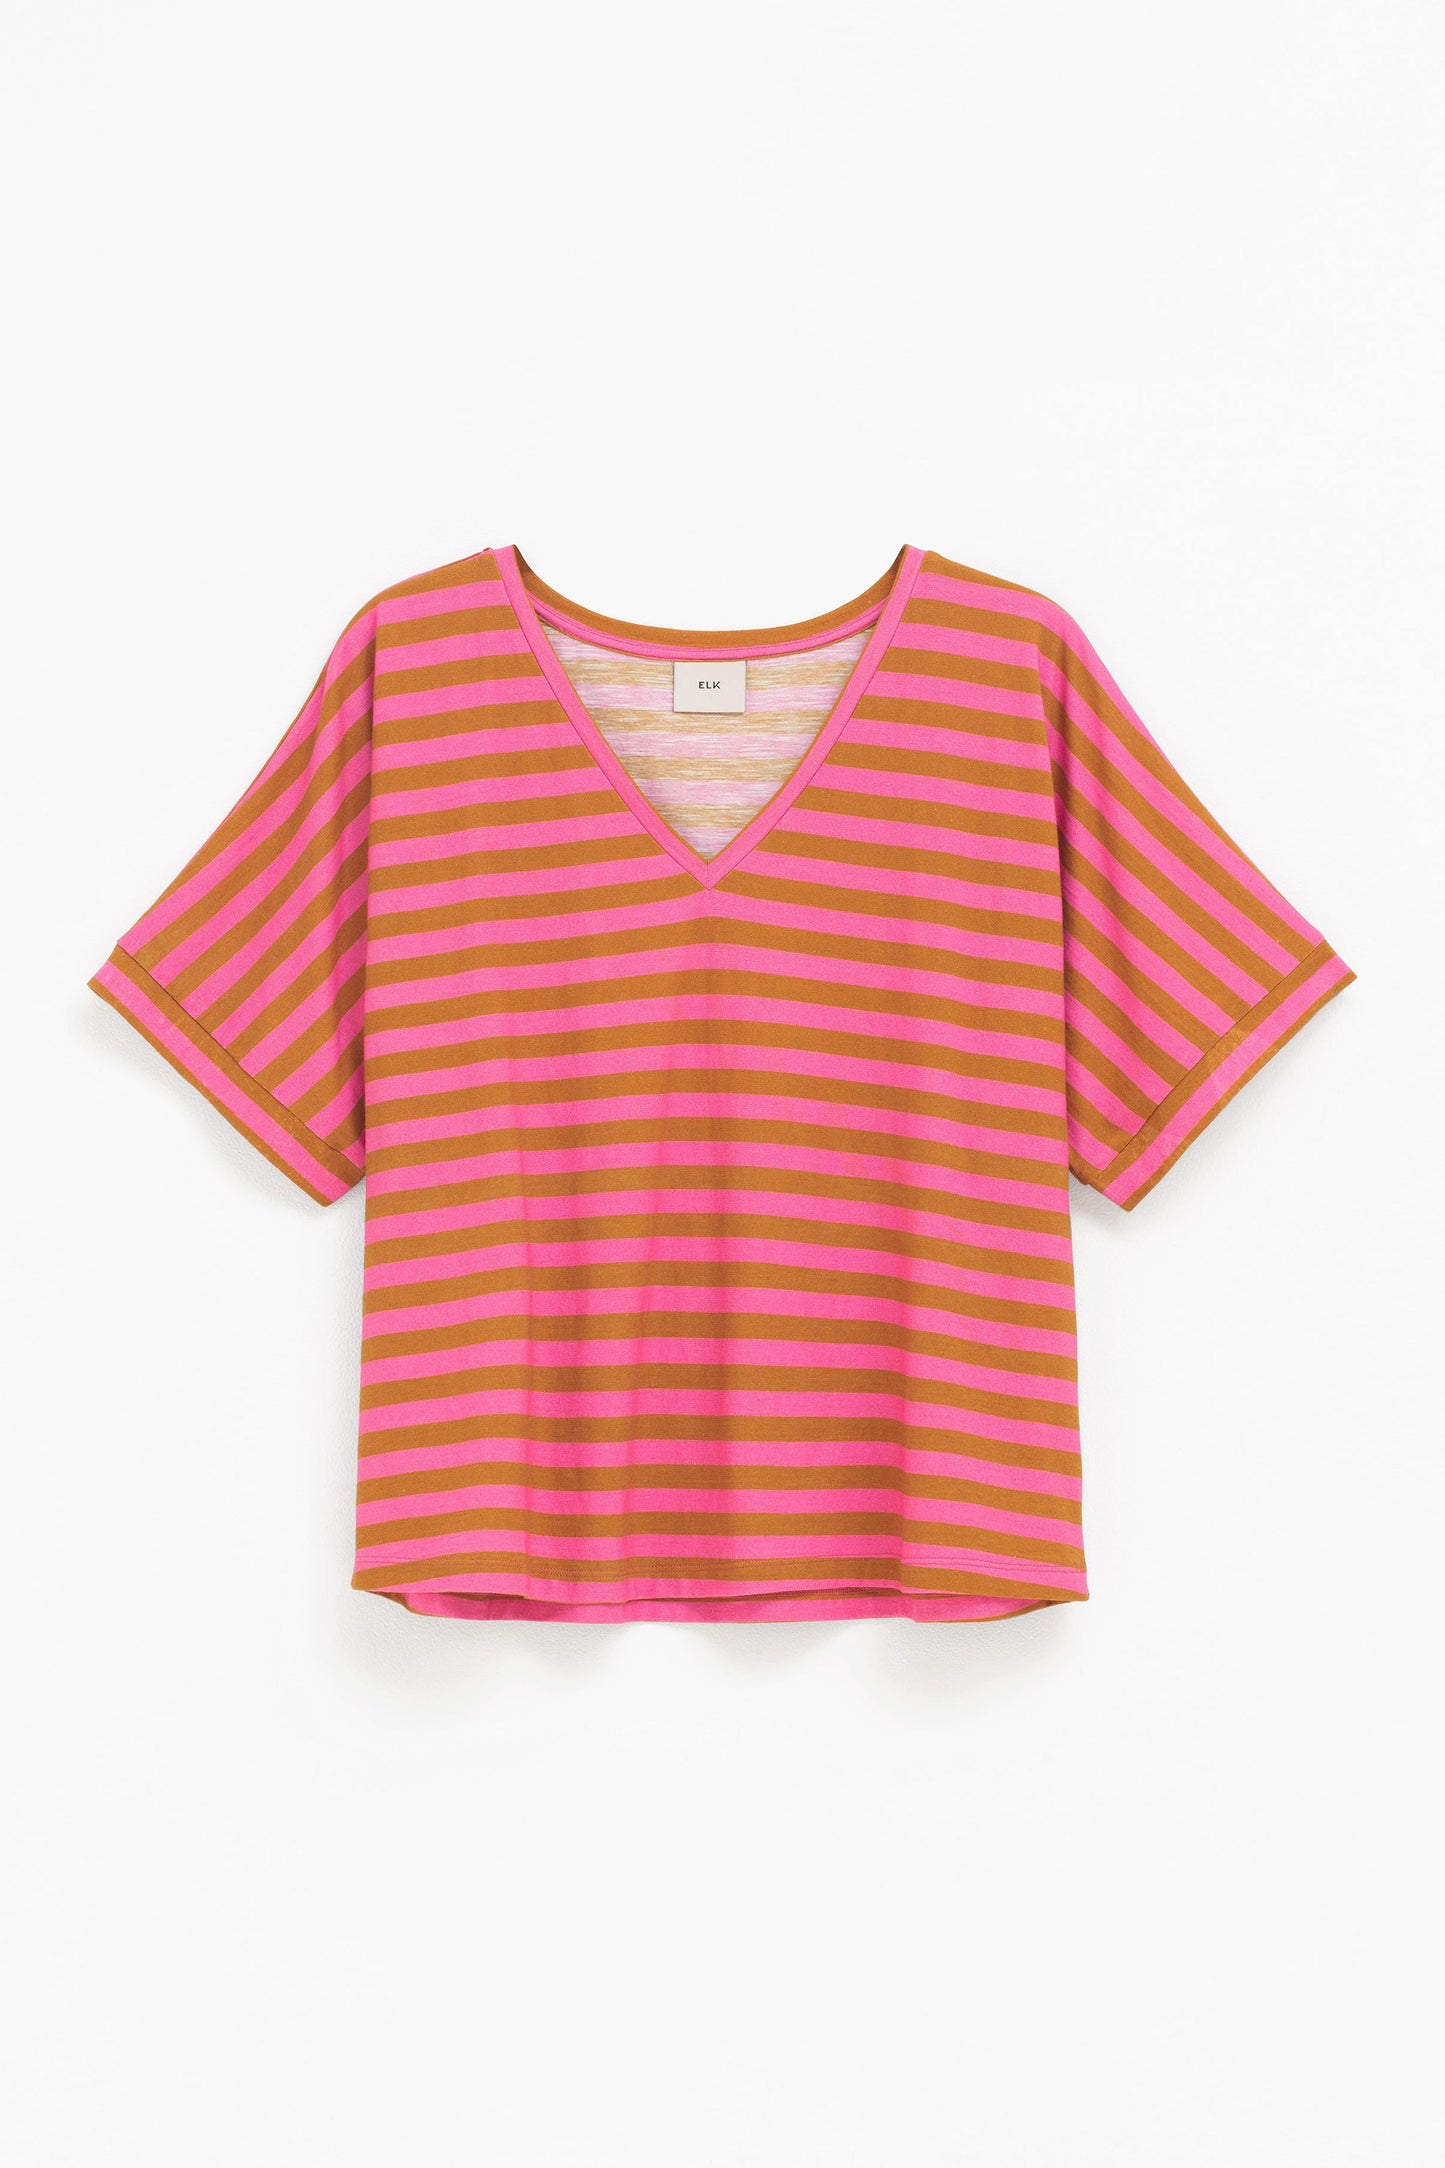 Seter Organic Cotton V-Neck Striped Jersey Tee Front | HONEY GOLD PINK